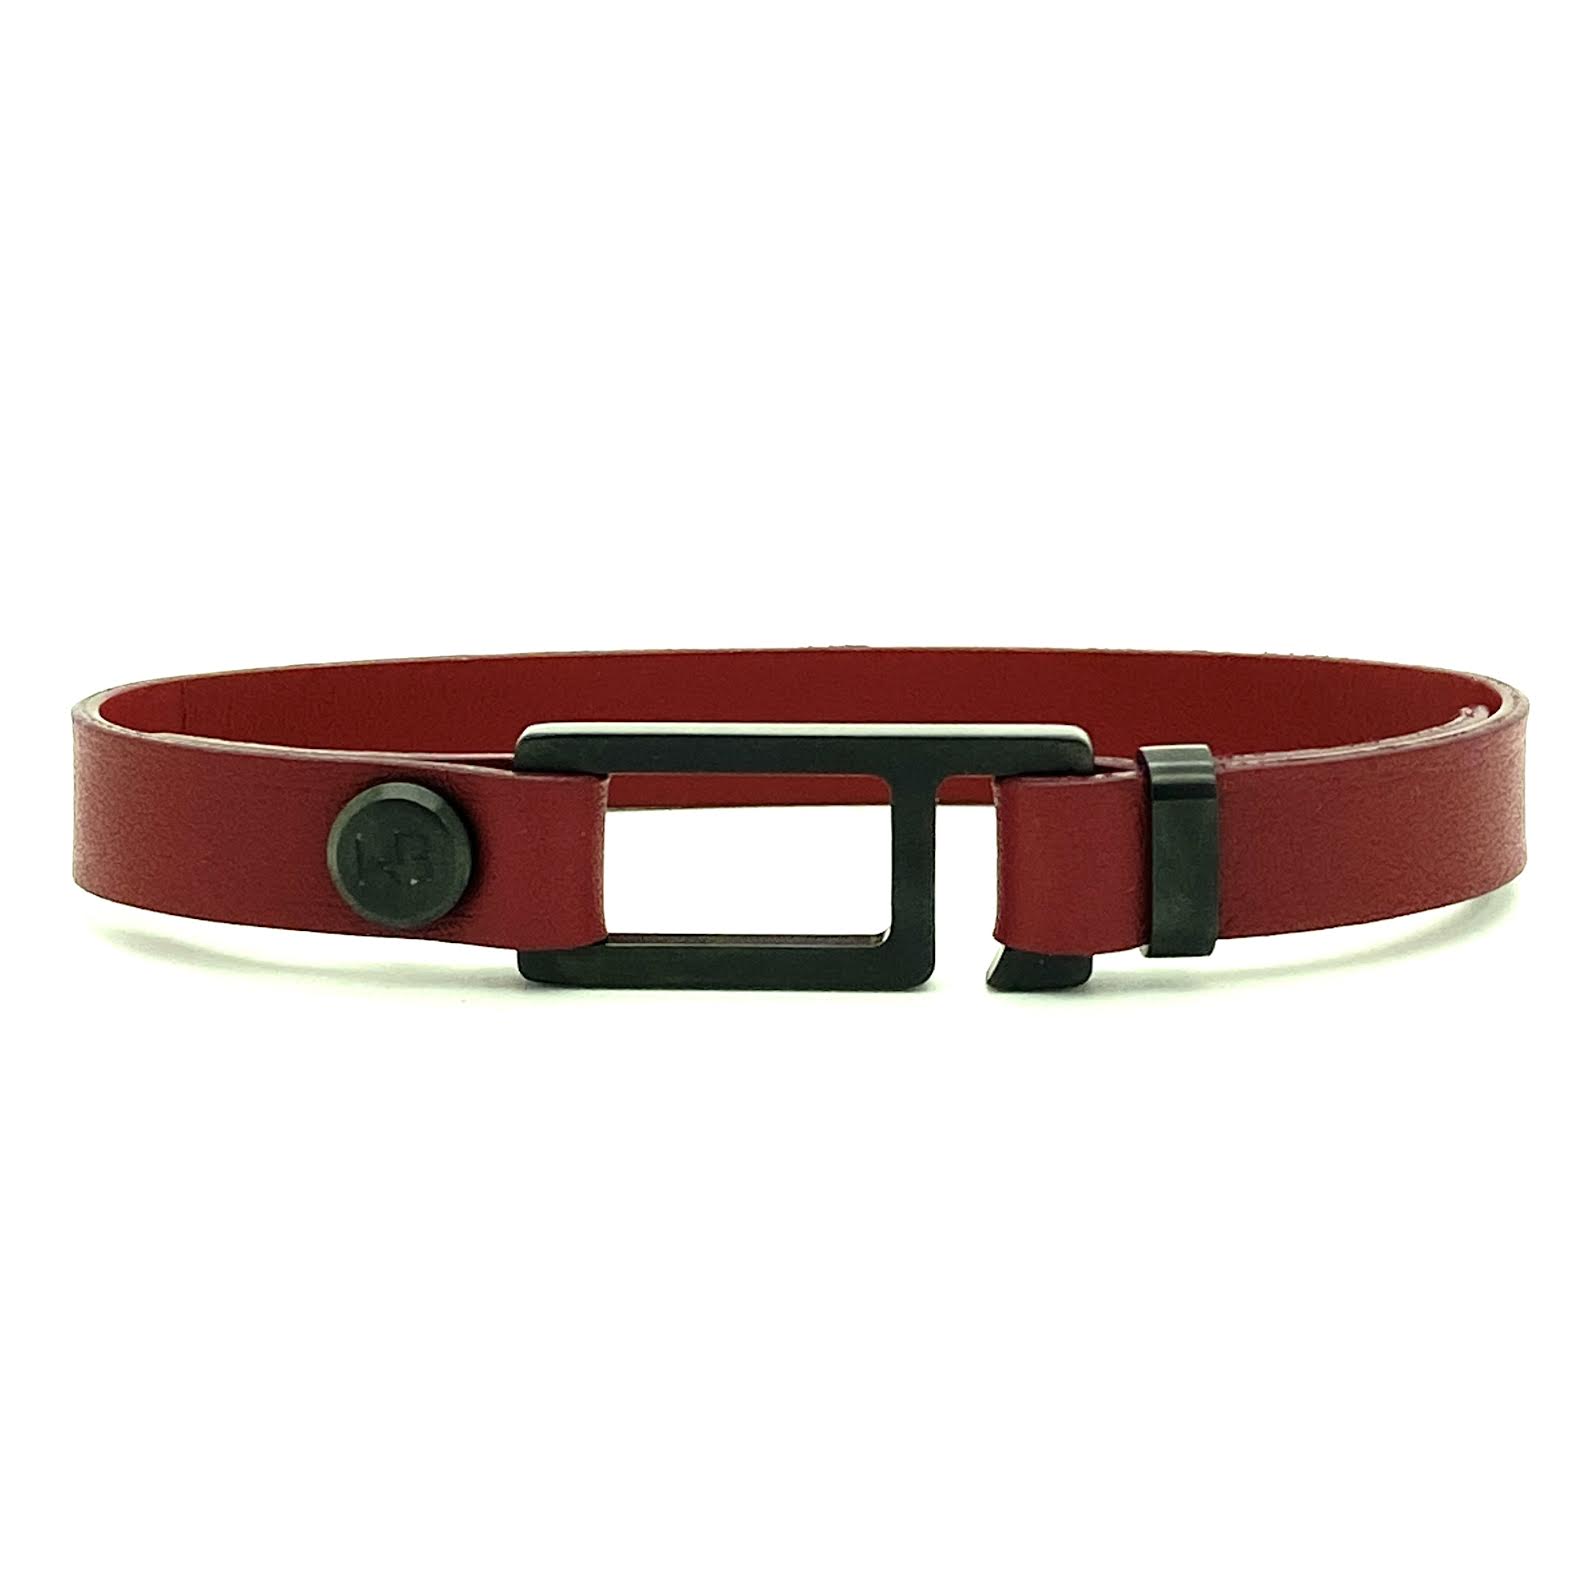 Our striking burgundy/black Italian leather bracelet is paired perfectly with our artisan designed, lightly brushed hardware. Your hardware choices include Rose Gold, Yellow Gold, Stainless Steel or Black Ceramic. This adjustable size bracelet is a distinctive piece worn alone or with a WristBend stacking bracelet. Made by WristBend